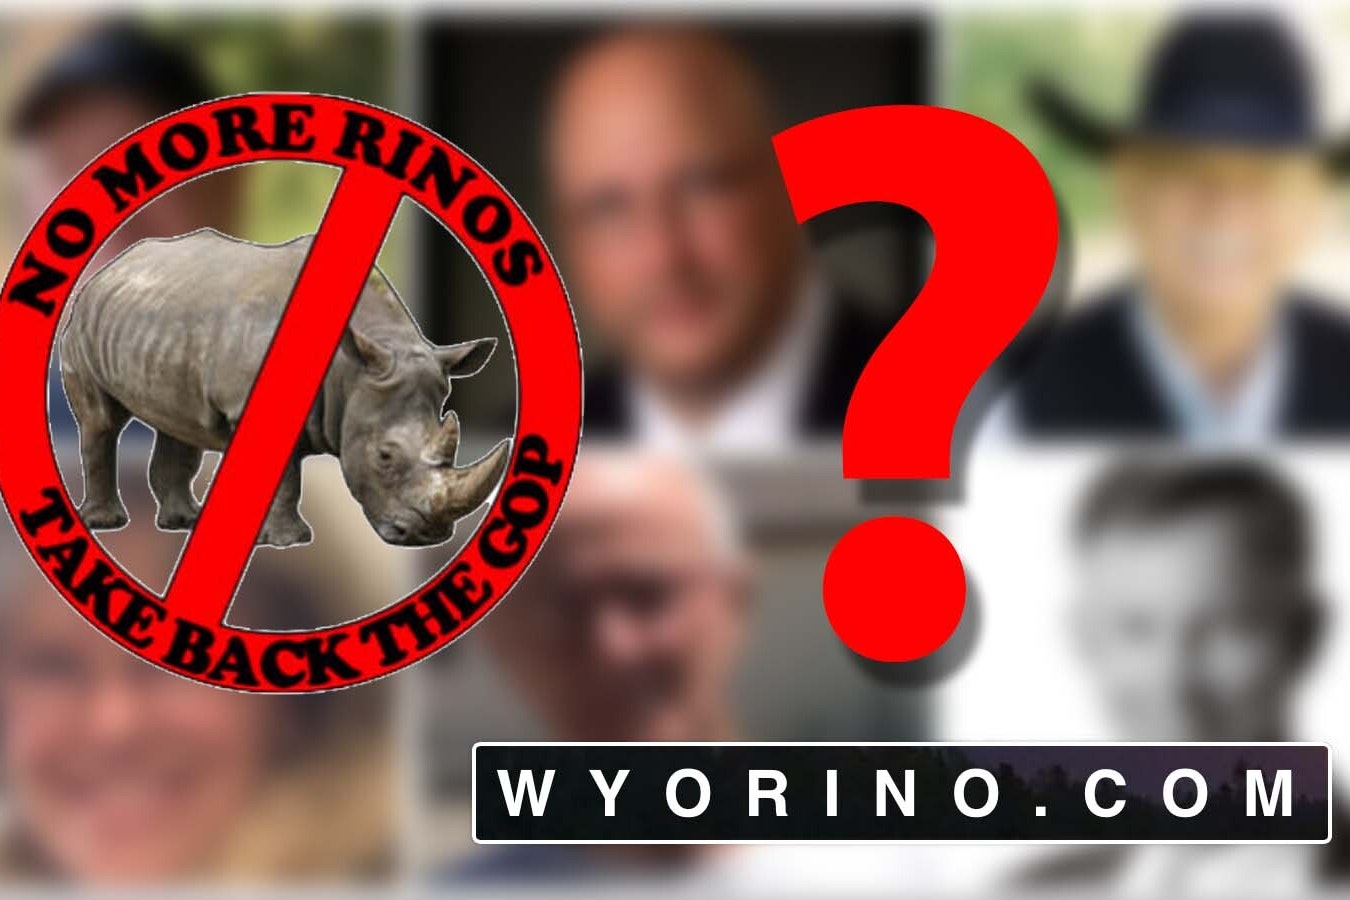 A Cowboy State Daily investigation found some interesting connections and similarities behind the anonymous conservative ranking website WyoRINO.com and other conservative Wyoming political sites, but no smoking guns to indicate who's behind it.